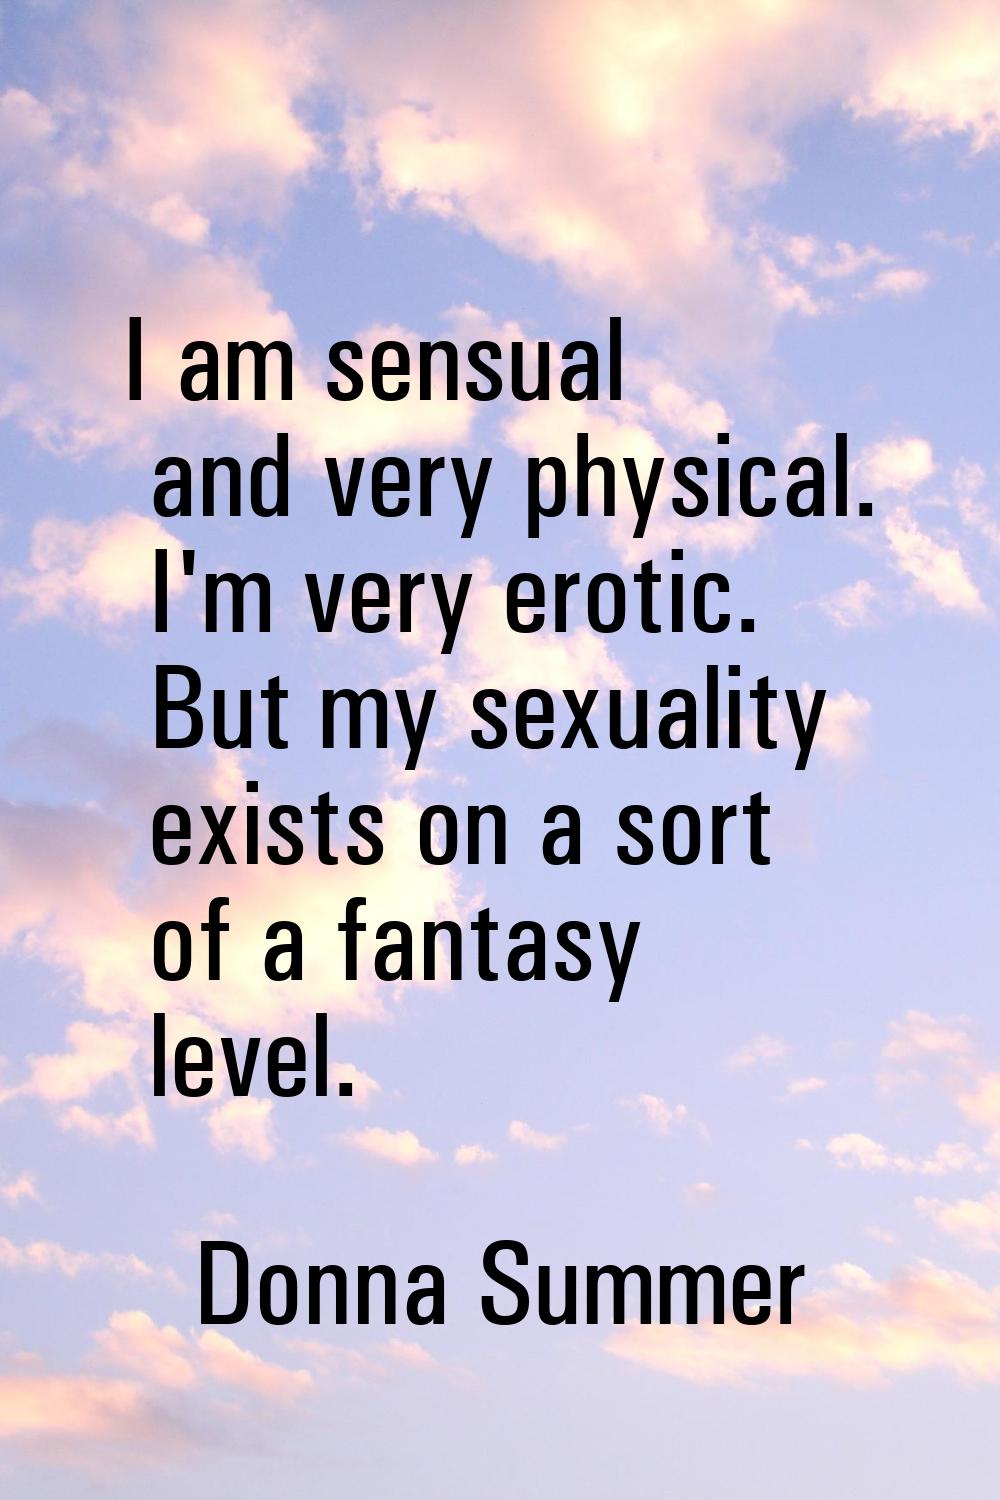 I am sensual and very physical. I'm very erotic. But my sexuality exists on a sort of a fantasy lev